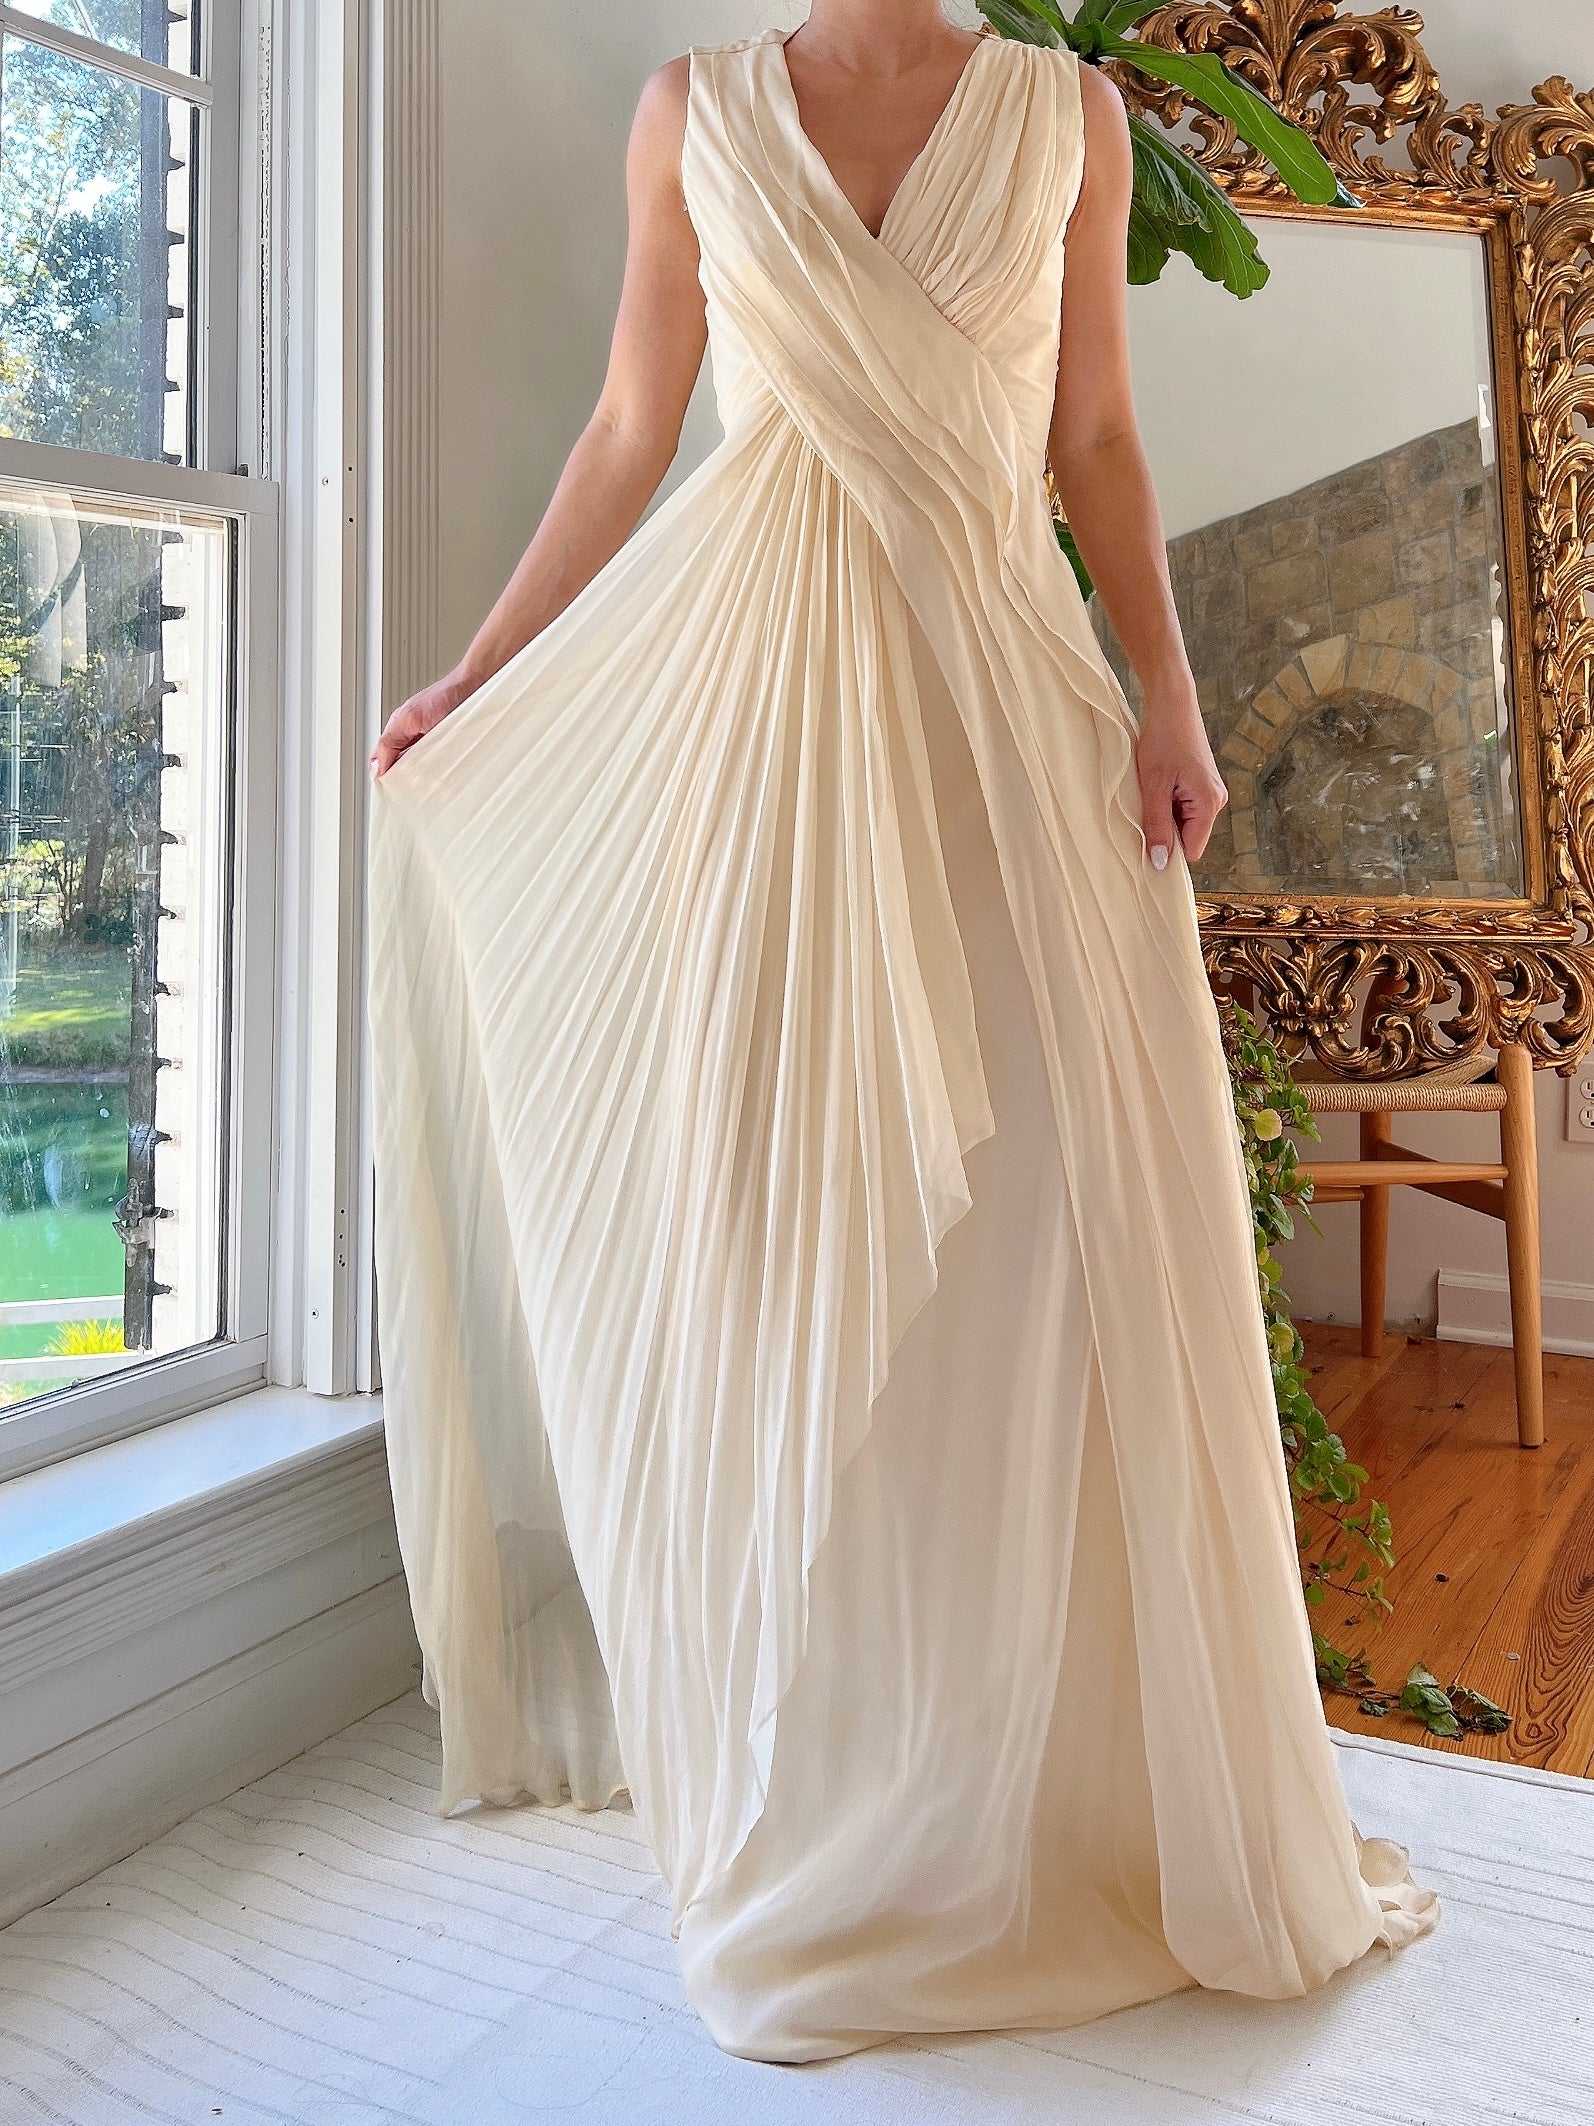 Silk Layered Gown - S